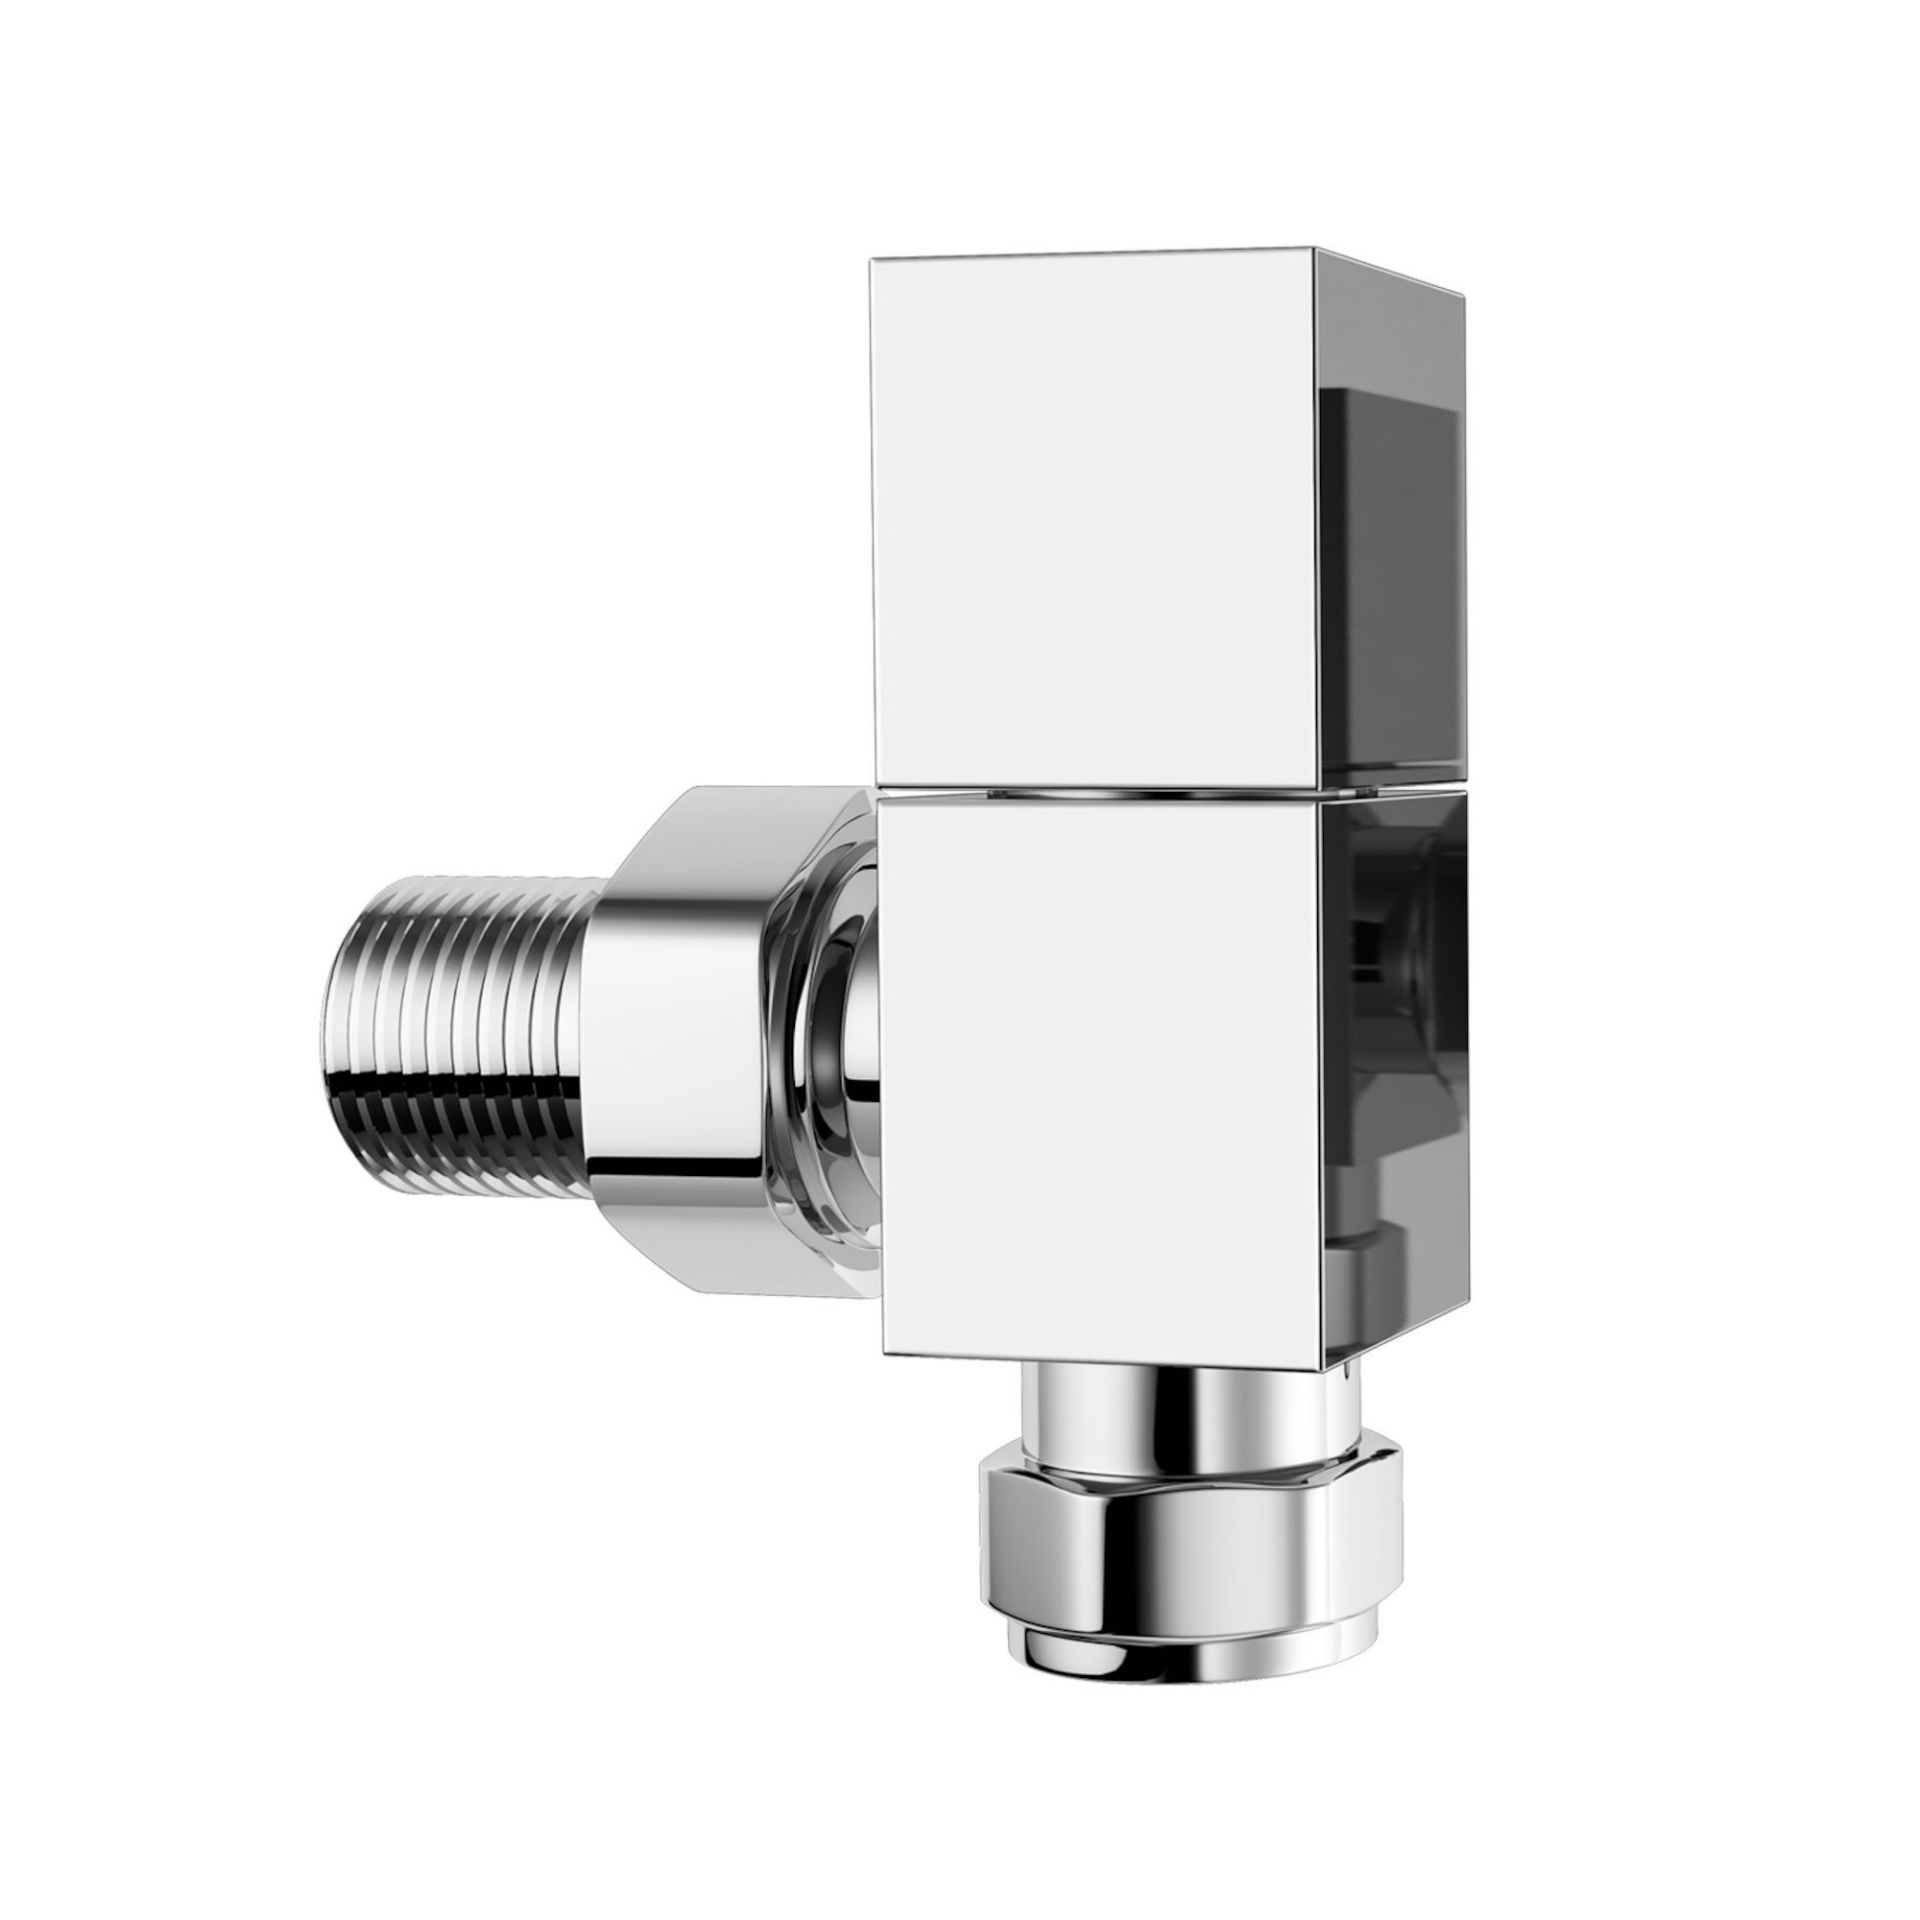 NEW (NV1009) 15mm Standard Connection Square Angled Chrome Radiator Valves These valves are des... - Image 2 of 2